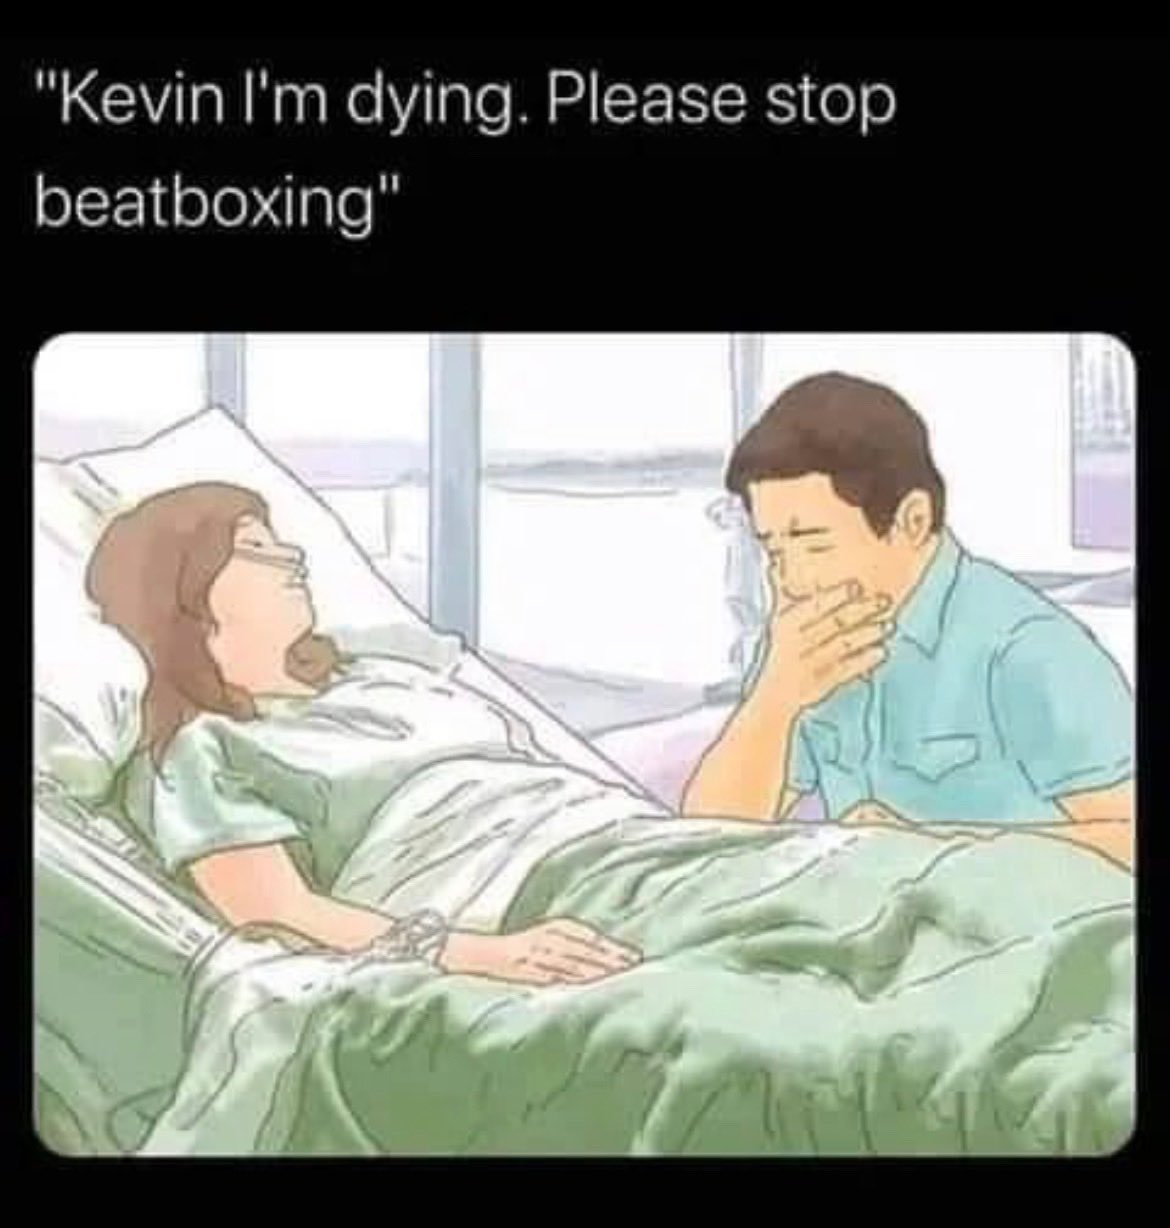 funny memes - stop beatboxing i m dying - "Kevin I'm dying. Please stop beatboxing"